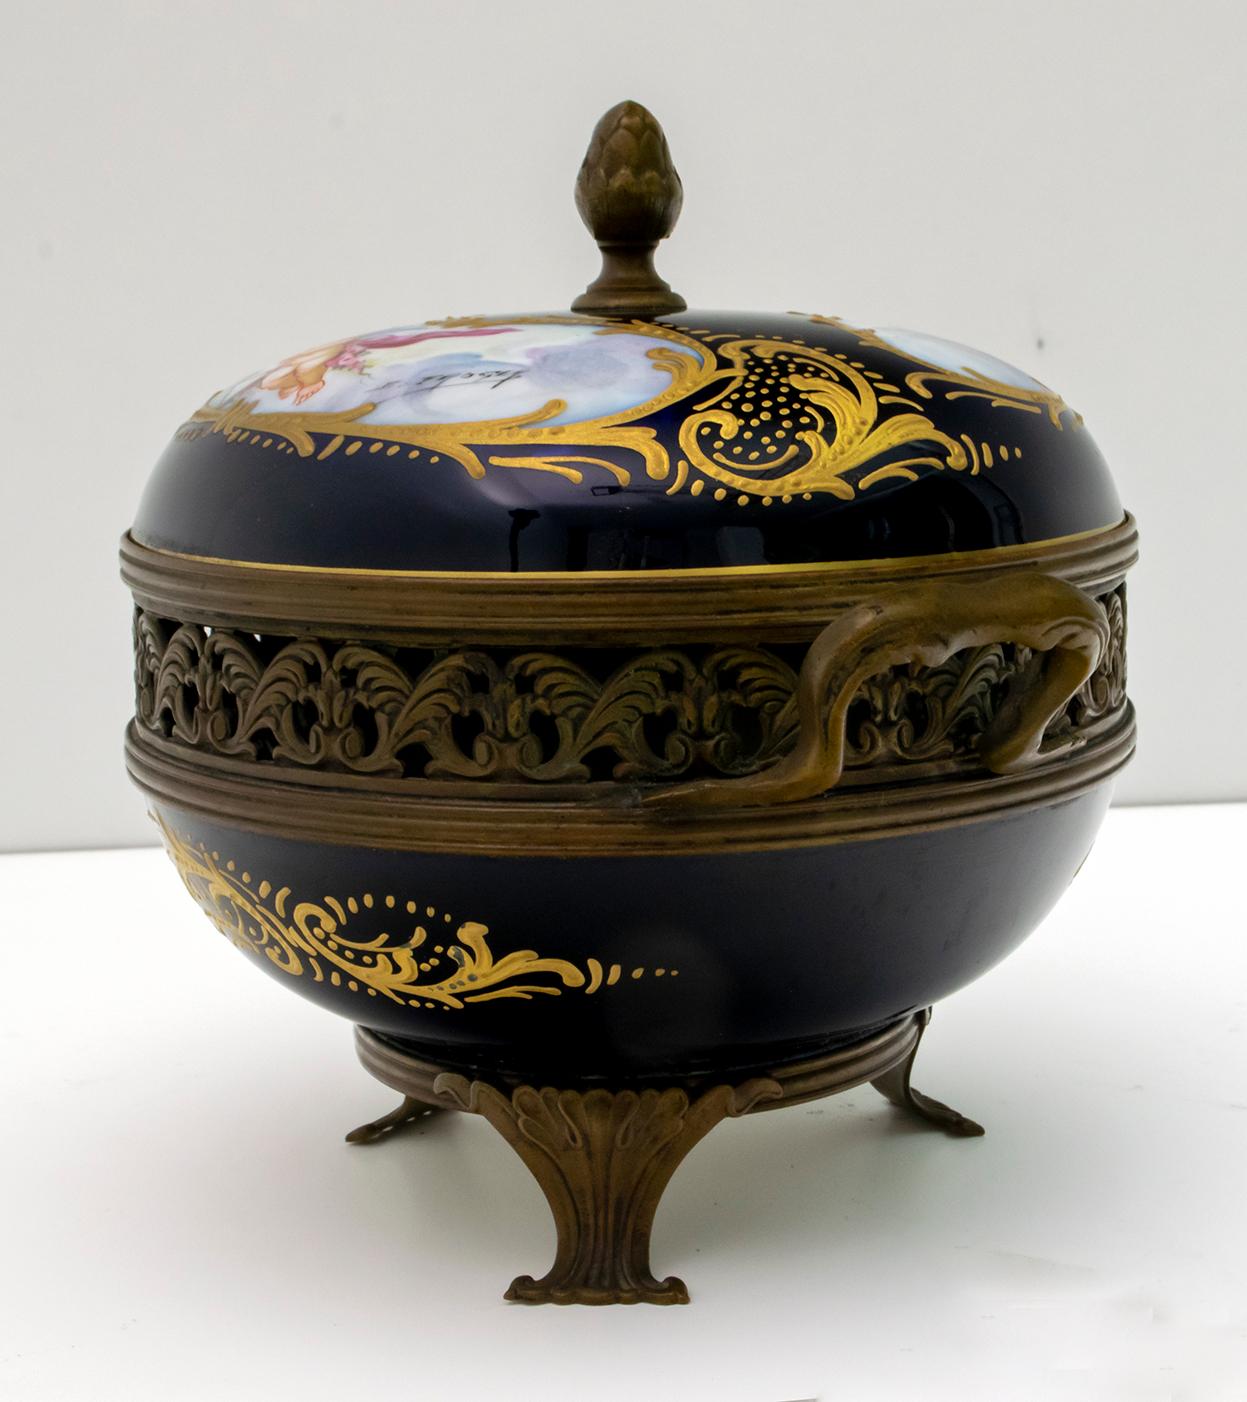 Signed E. Froger 19th Century French Porcelain Potpourri by Sevres, 1880 For Sale 10